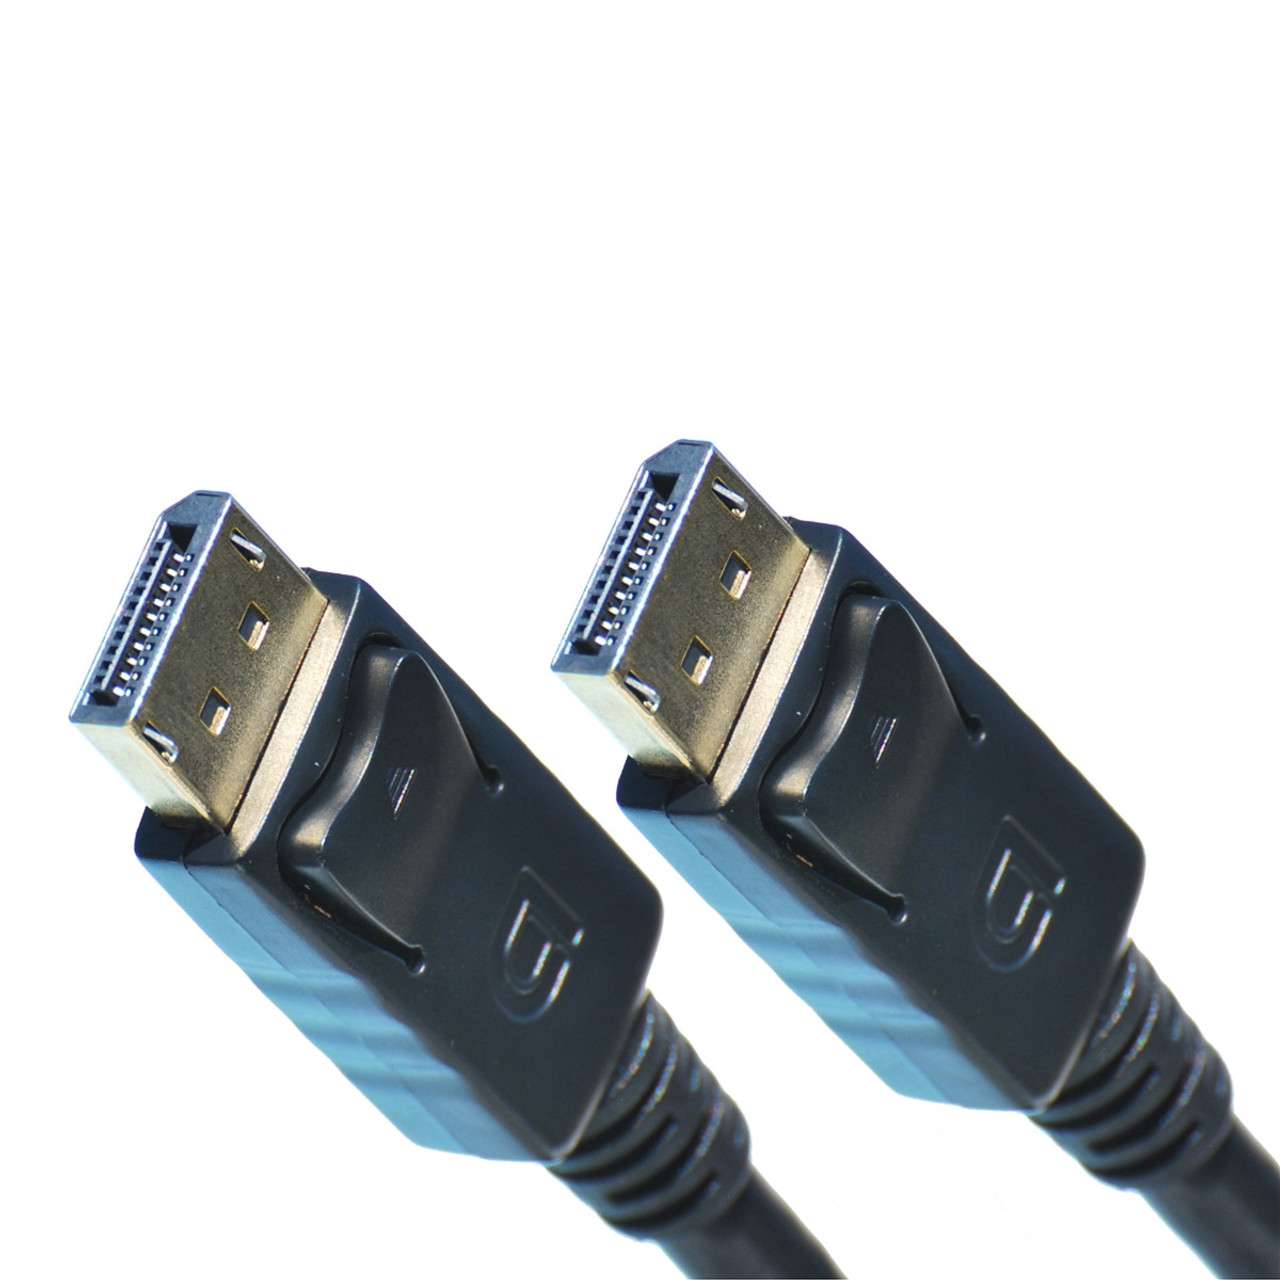 DP Cable